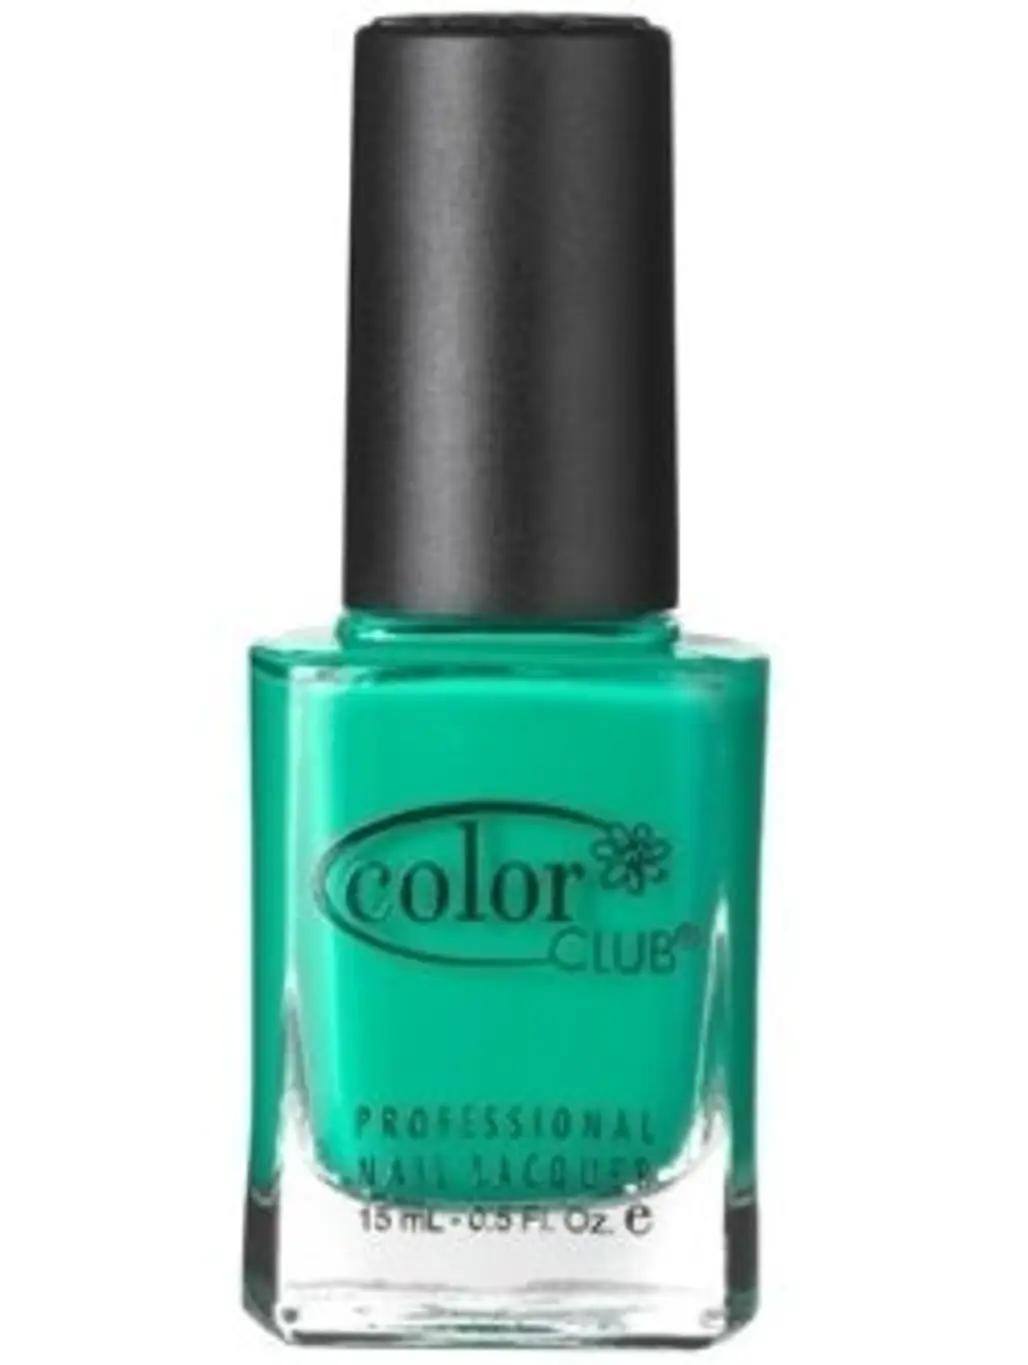 Color Club Nail Lacquer in Edie